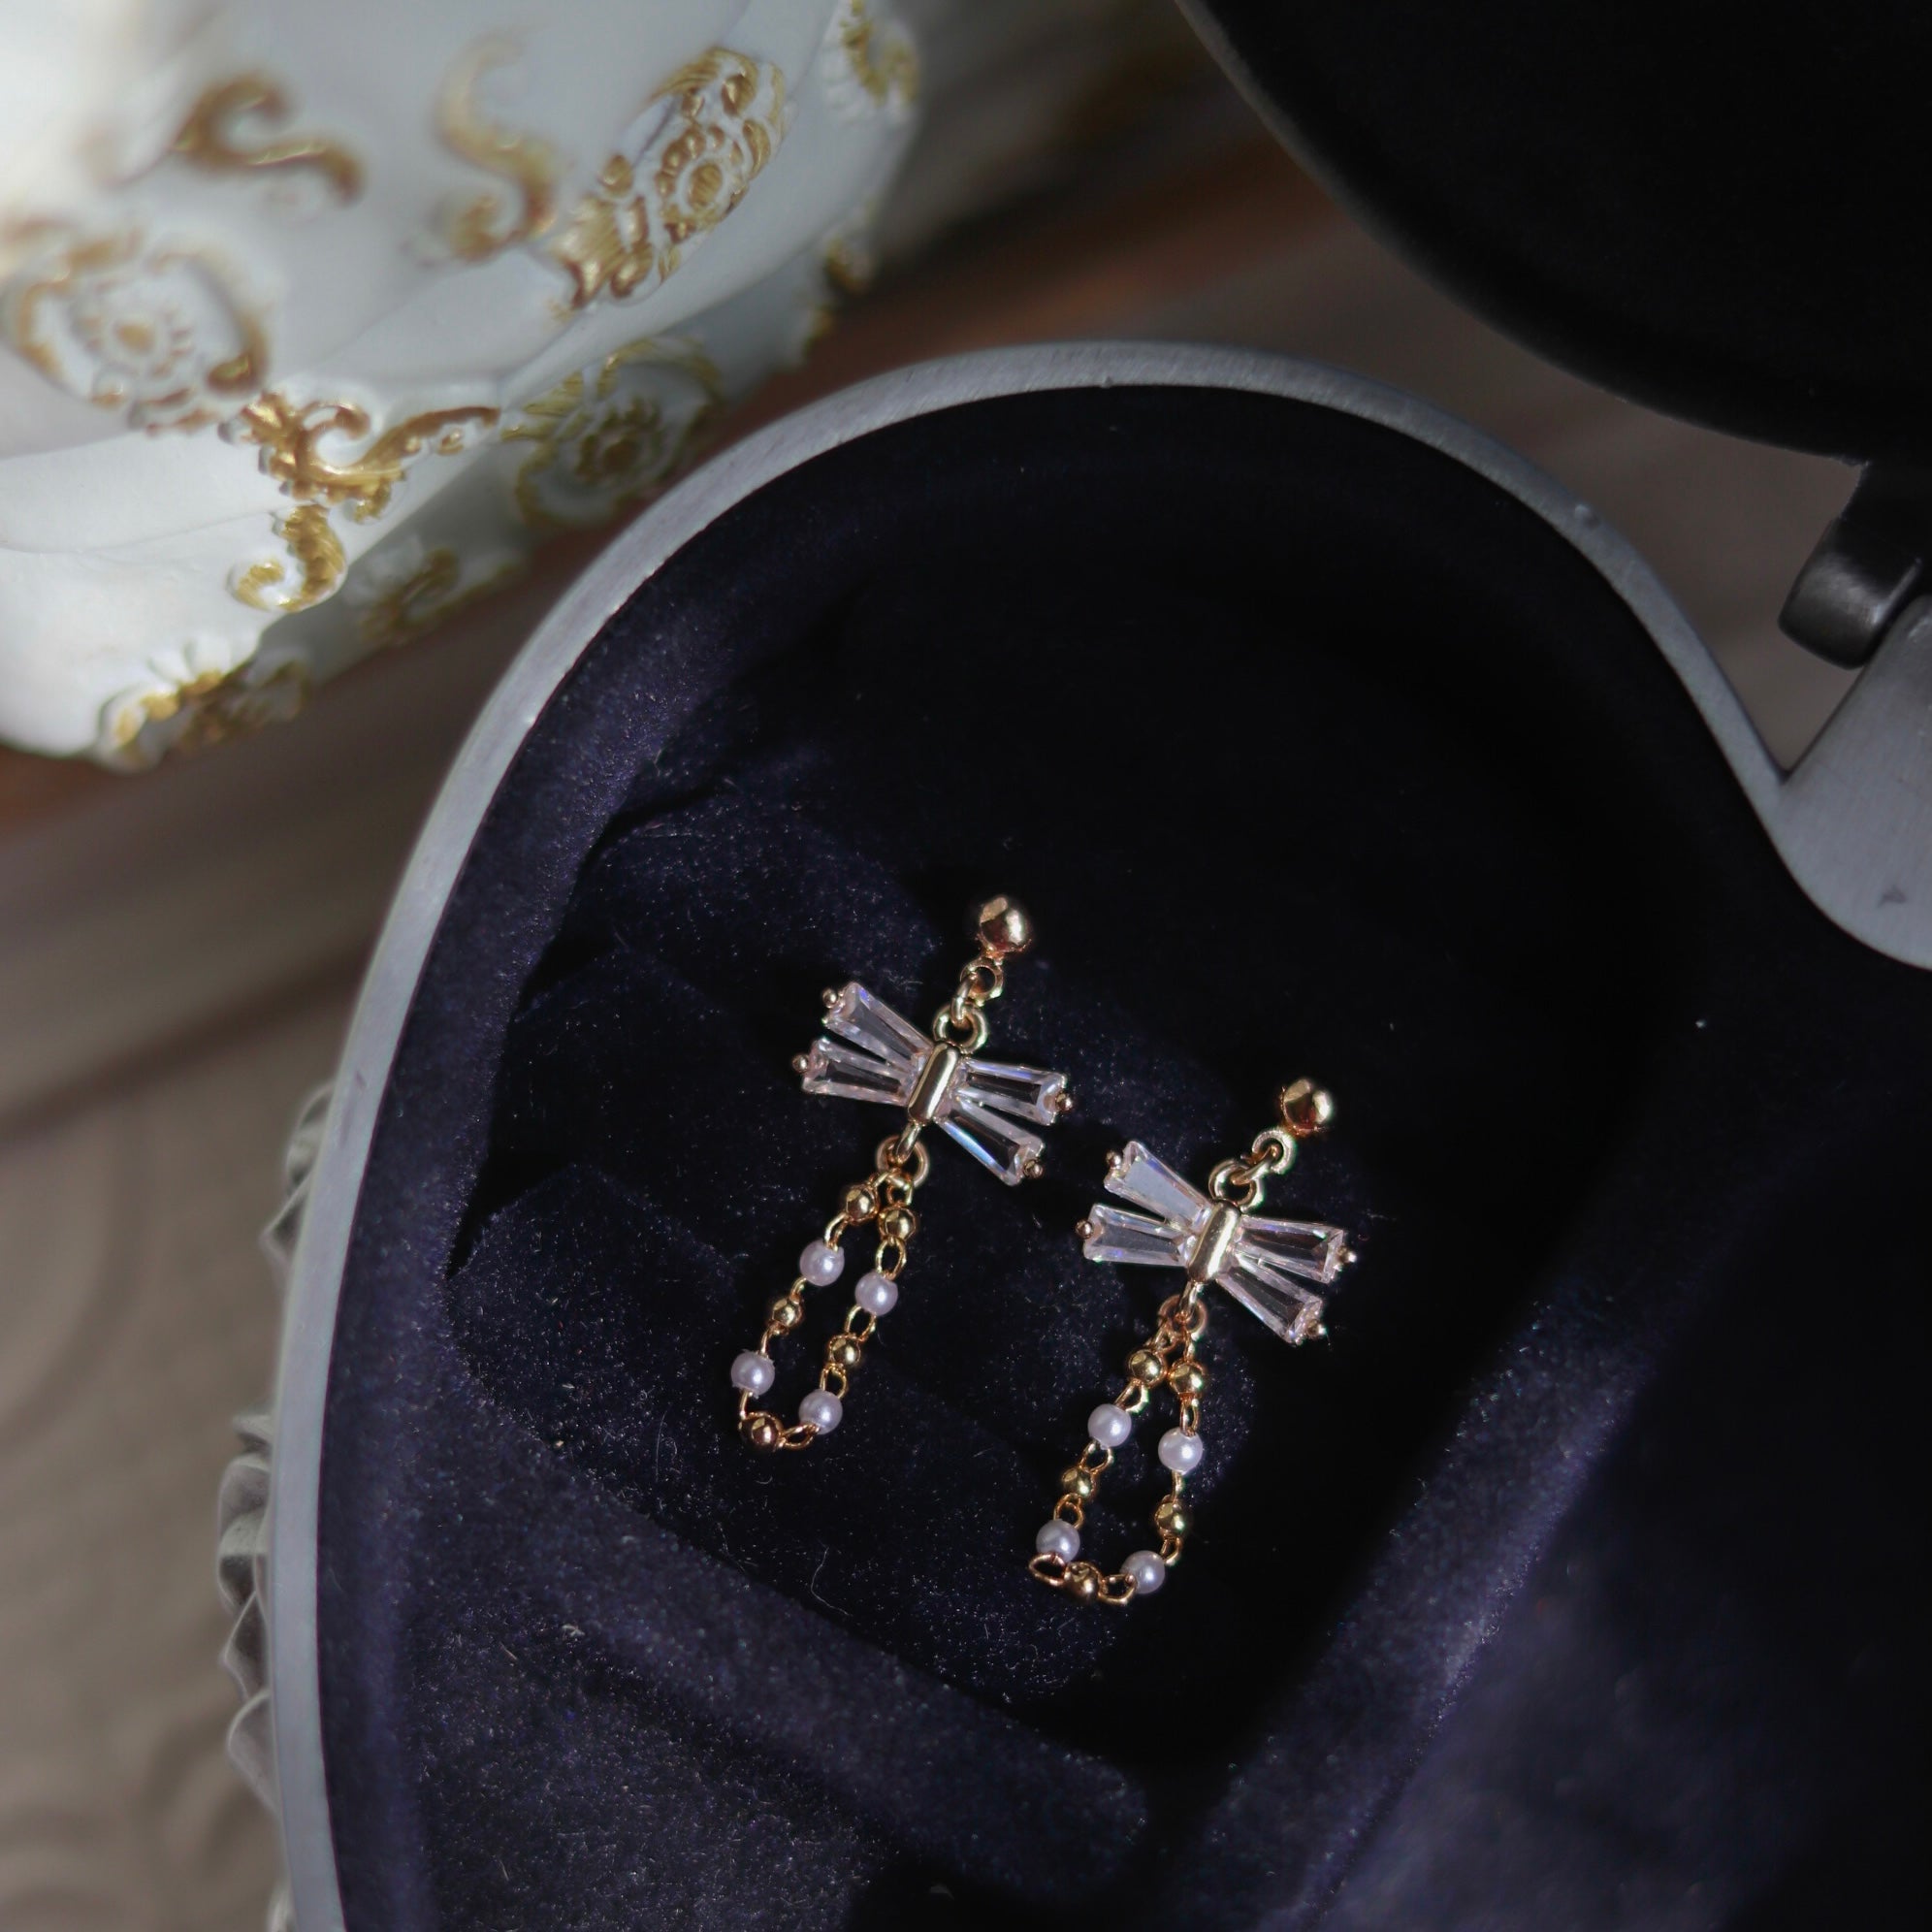 Asymmetrical Butterfly Earrings – The Nadia Collection